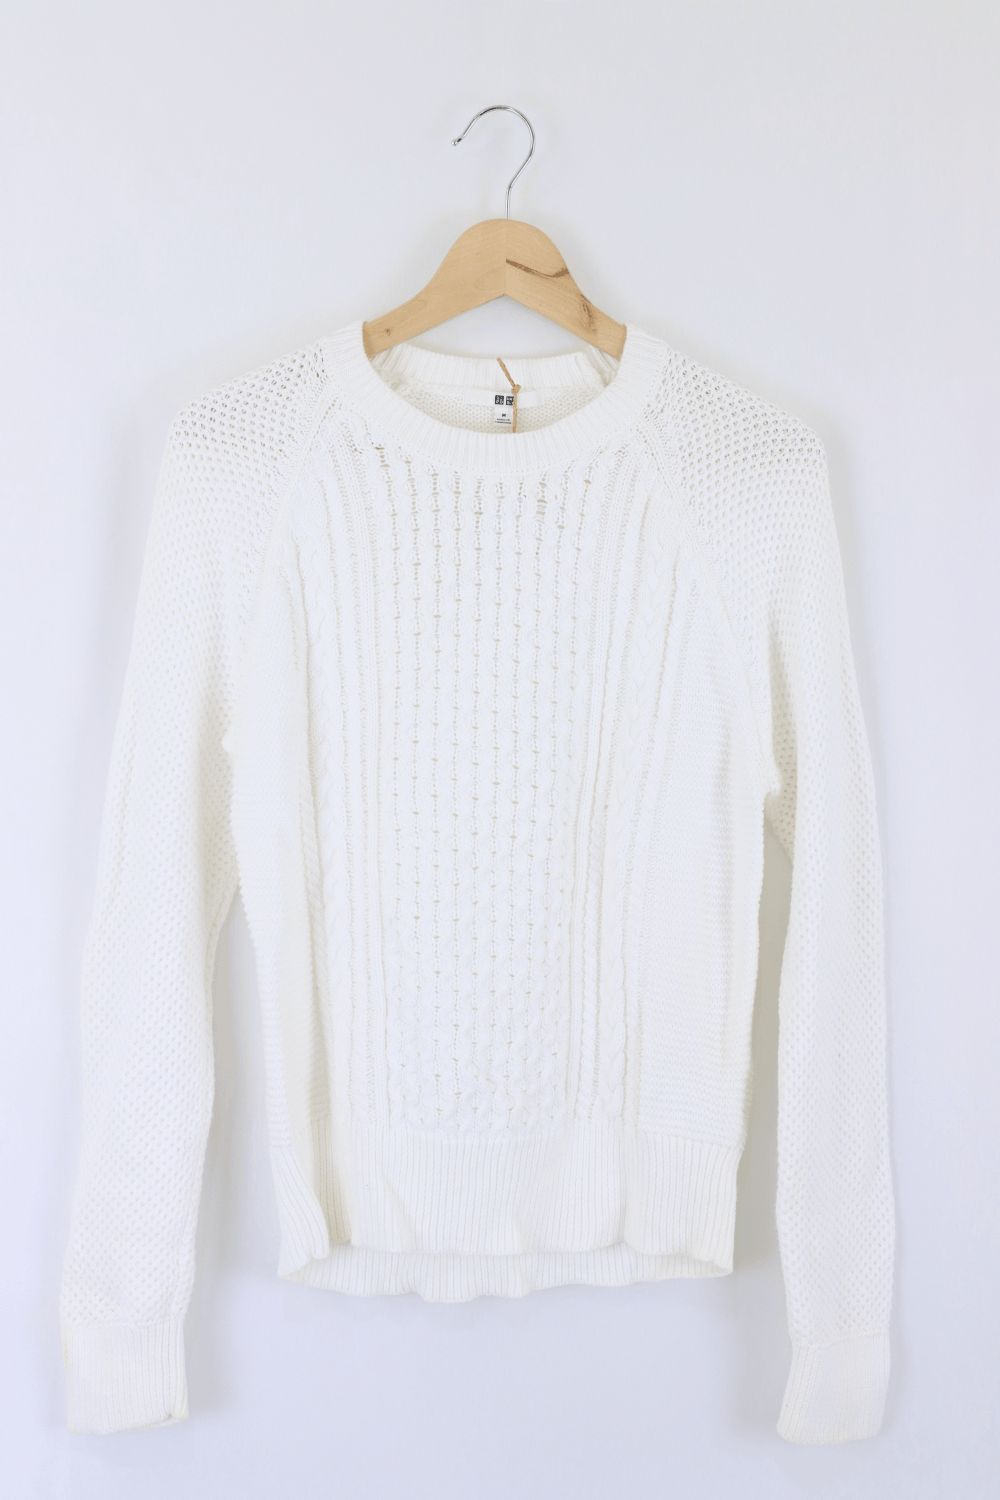 Uniqlo White Knitted Jumper M